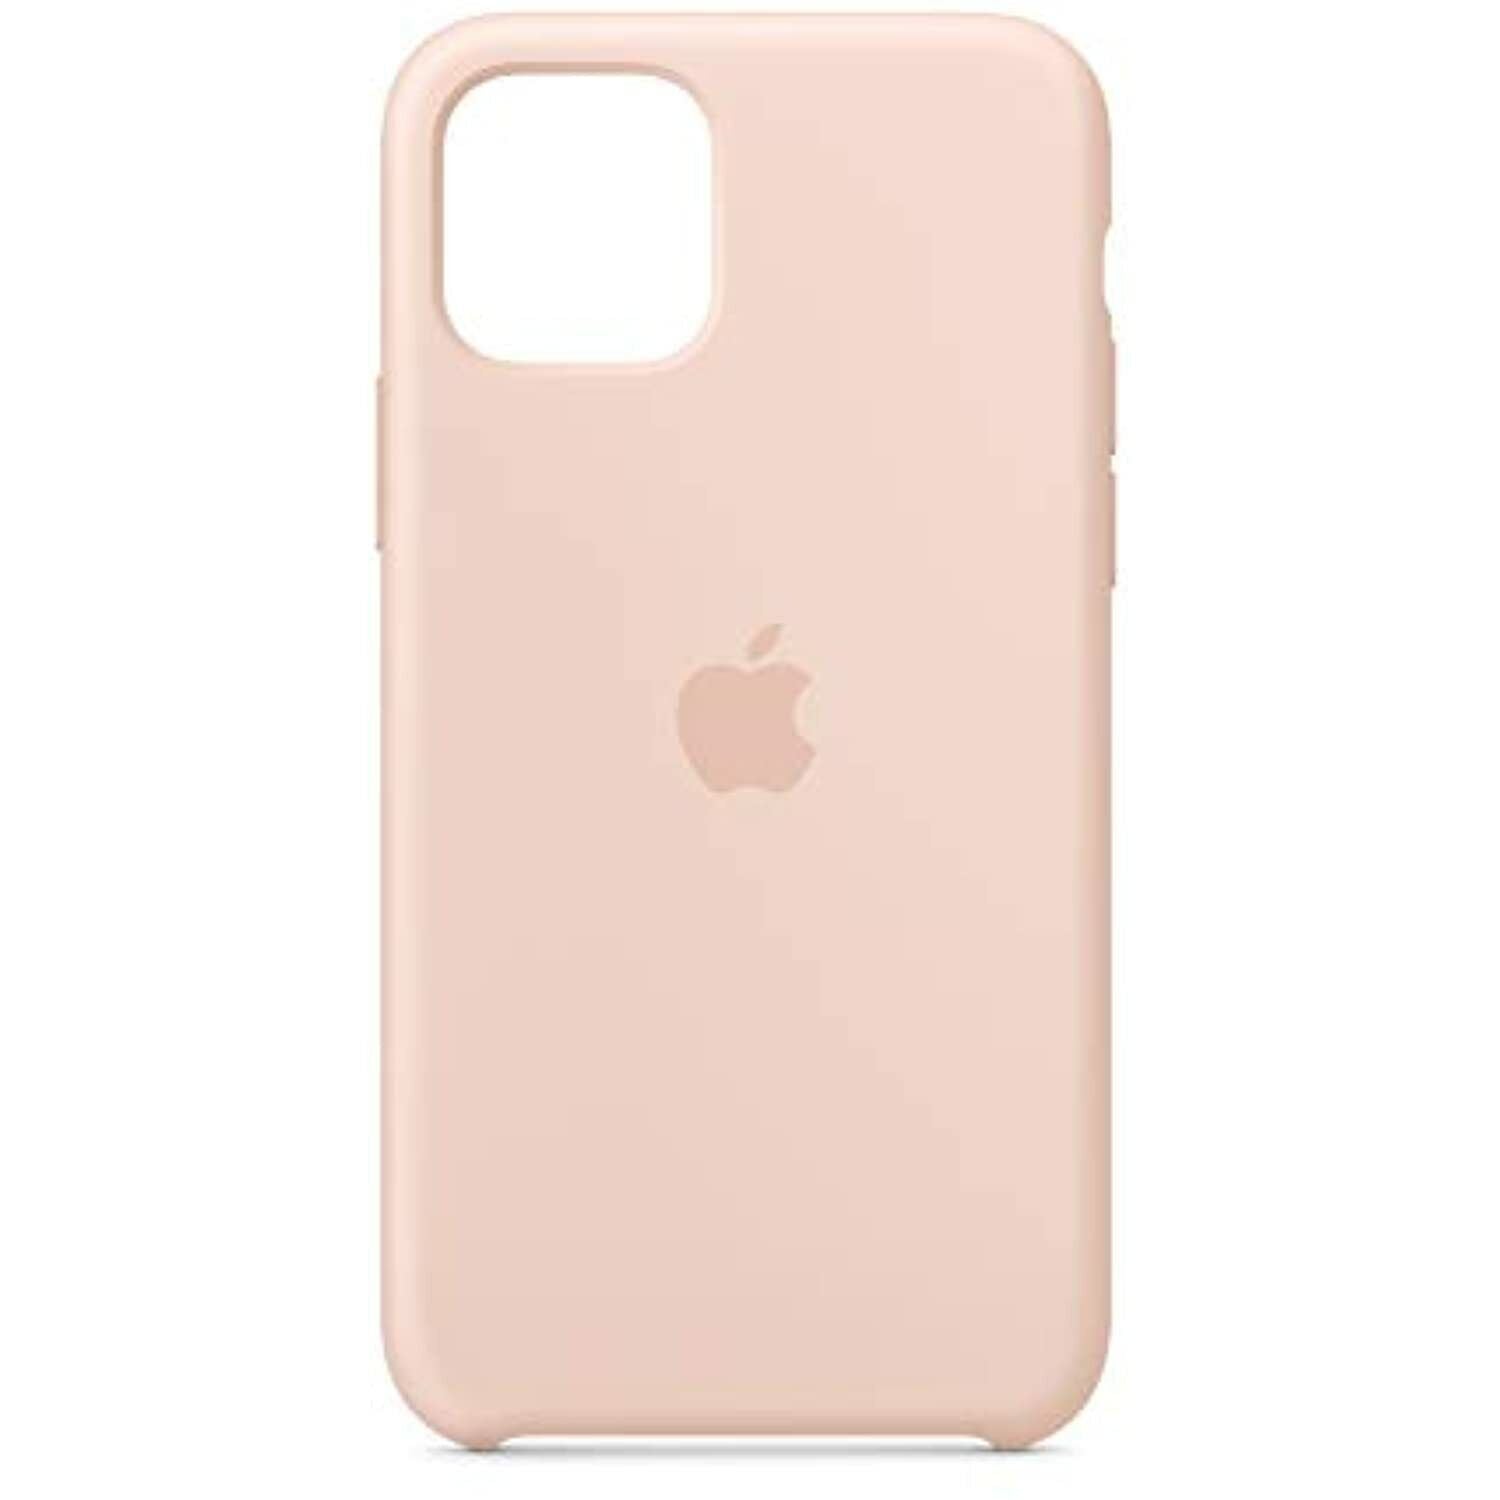 Apple Silicone Backcover for iPhone 11 pro - Pink Sand